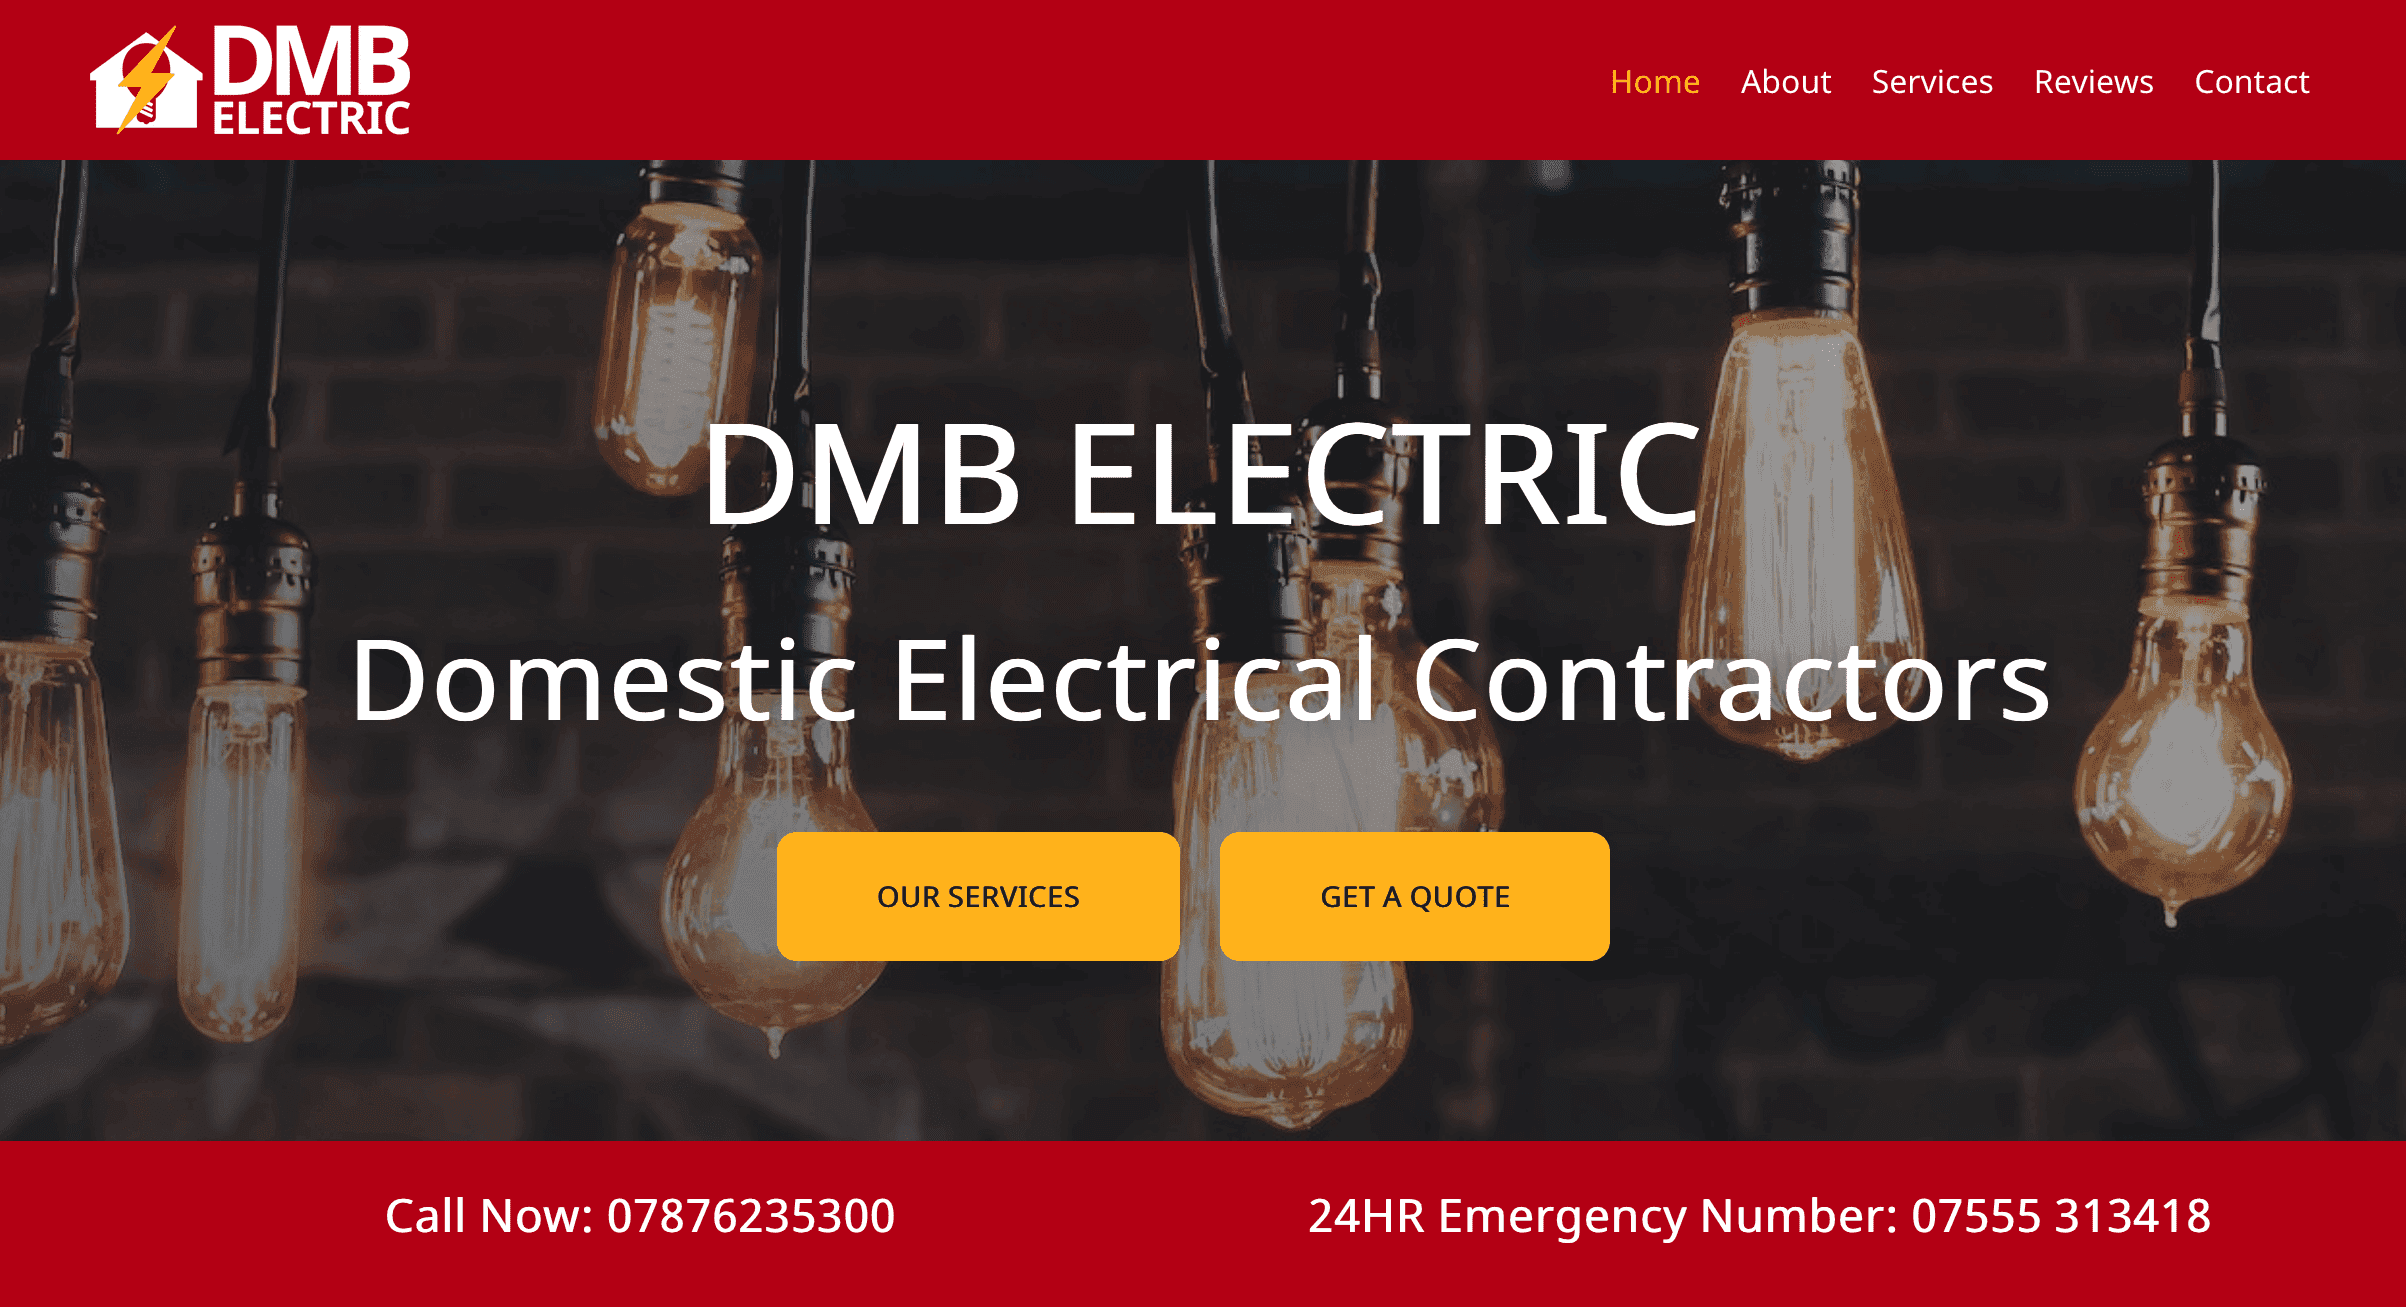 DMB Electric's New Website